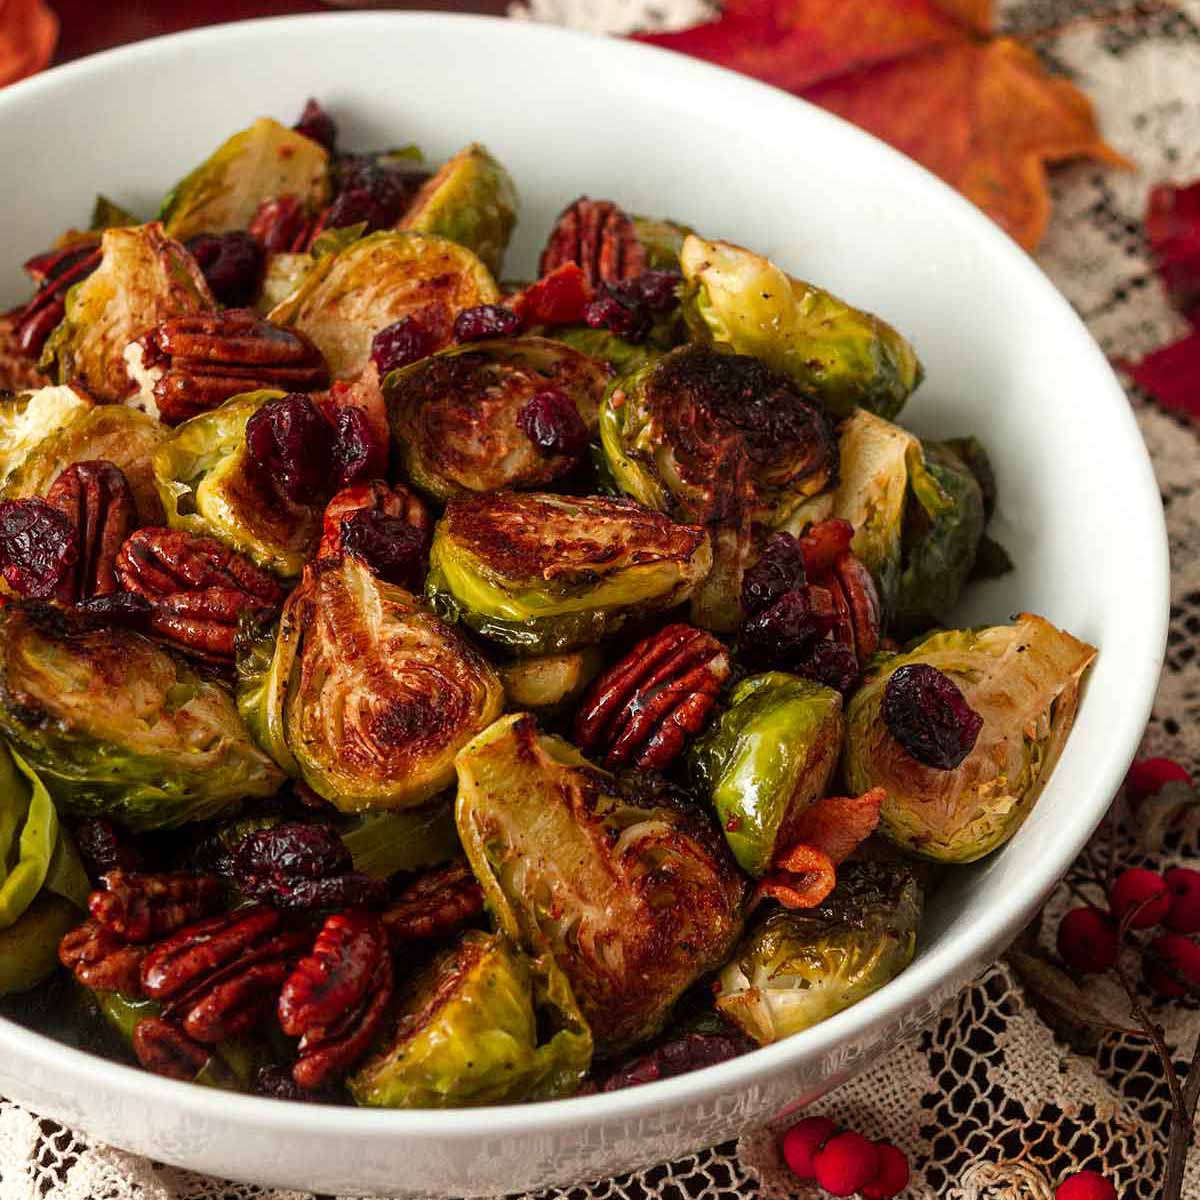 A bowl of Brussels sprouts, bacon, cranberries and pecans on a table with a lace table cloth and scattered leaves.